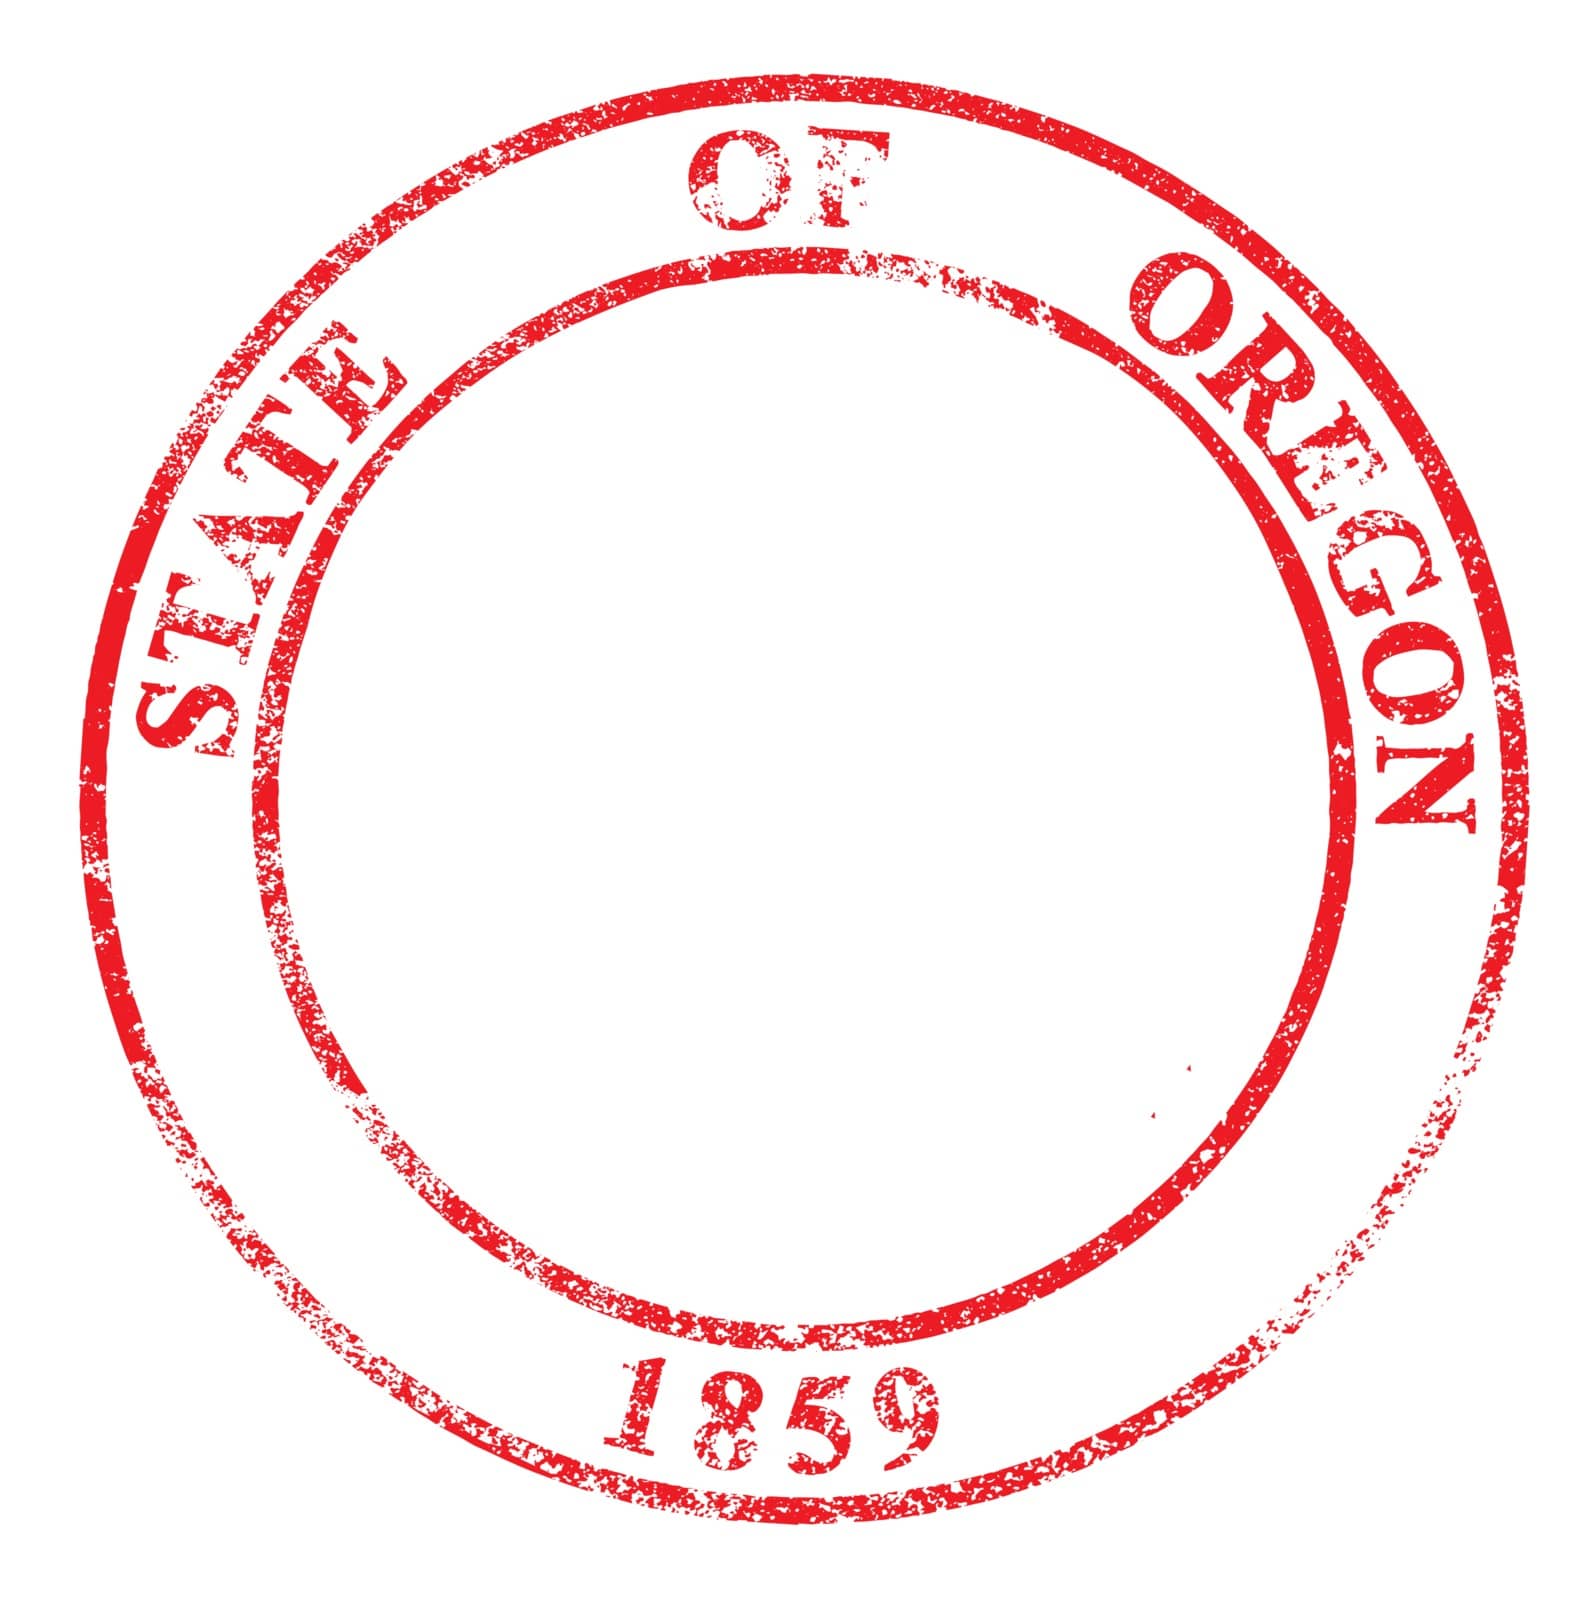 Oregon rubber red ink stamp on a white background